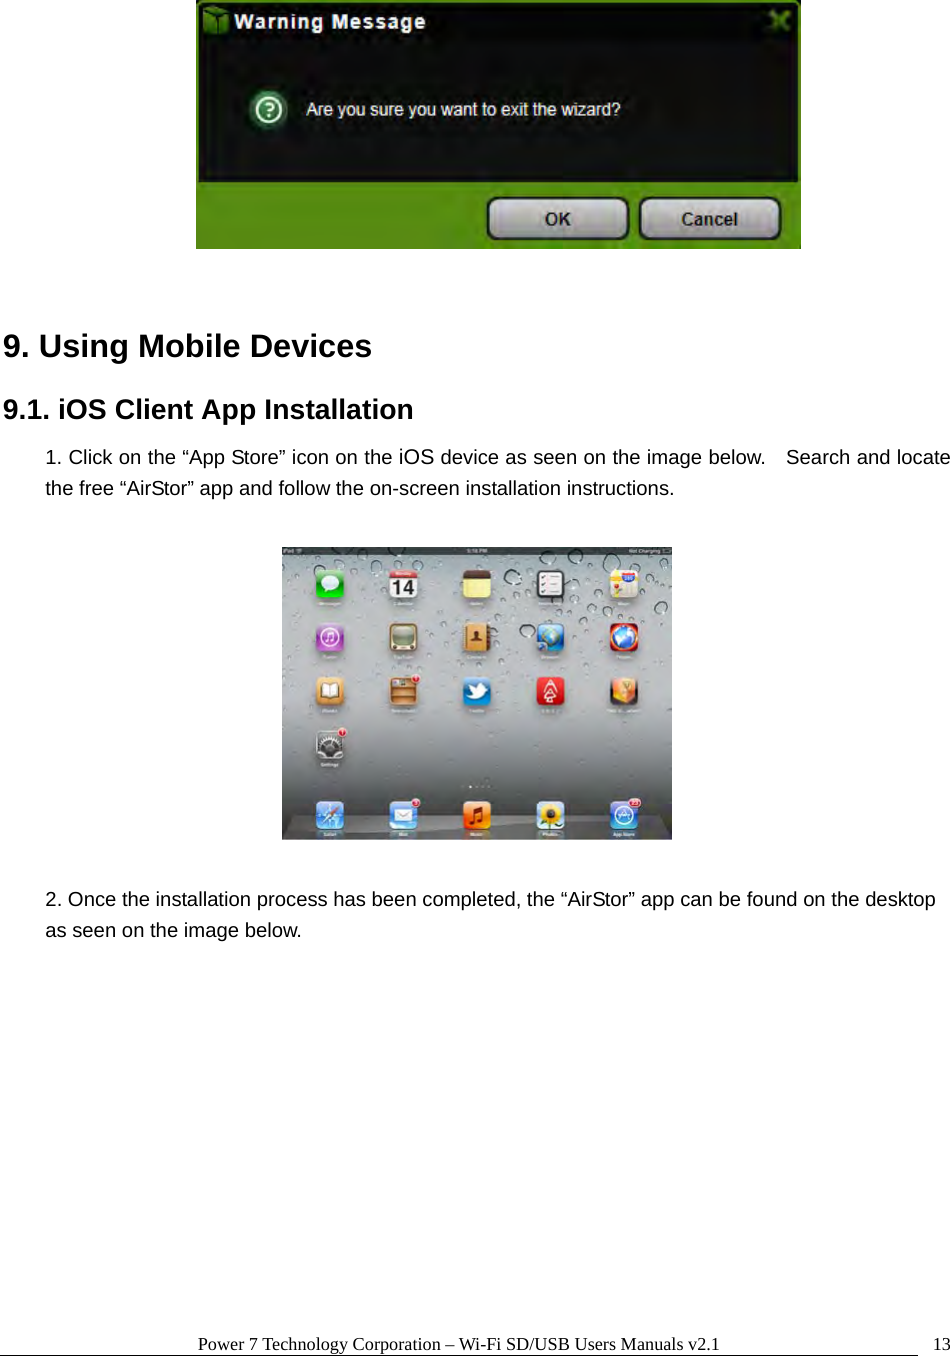 Power 7 Technology Corporation – Wi-Fi SD/USB Users Manuals v2.1  13  9. Using Mobile Devices 9.1. iOS Client App Installation 1. Click on the “App Store” icon on the iOS device as seen on the image below.    Search and locate the free “AirStor” app and follow the on-screen installation instructions.    2. Once the installation process has been completed, the “AirStor” app can be found on the desktop as seen on the image below.    